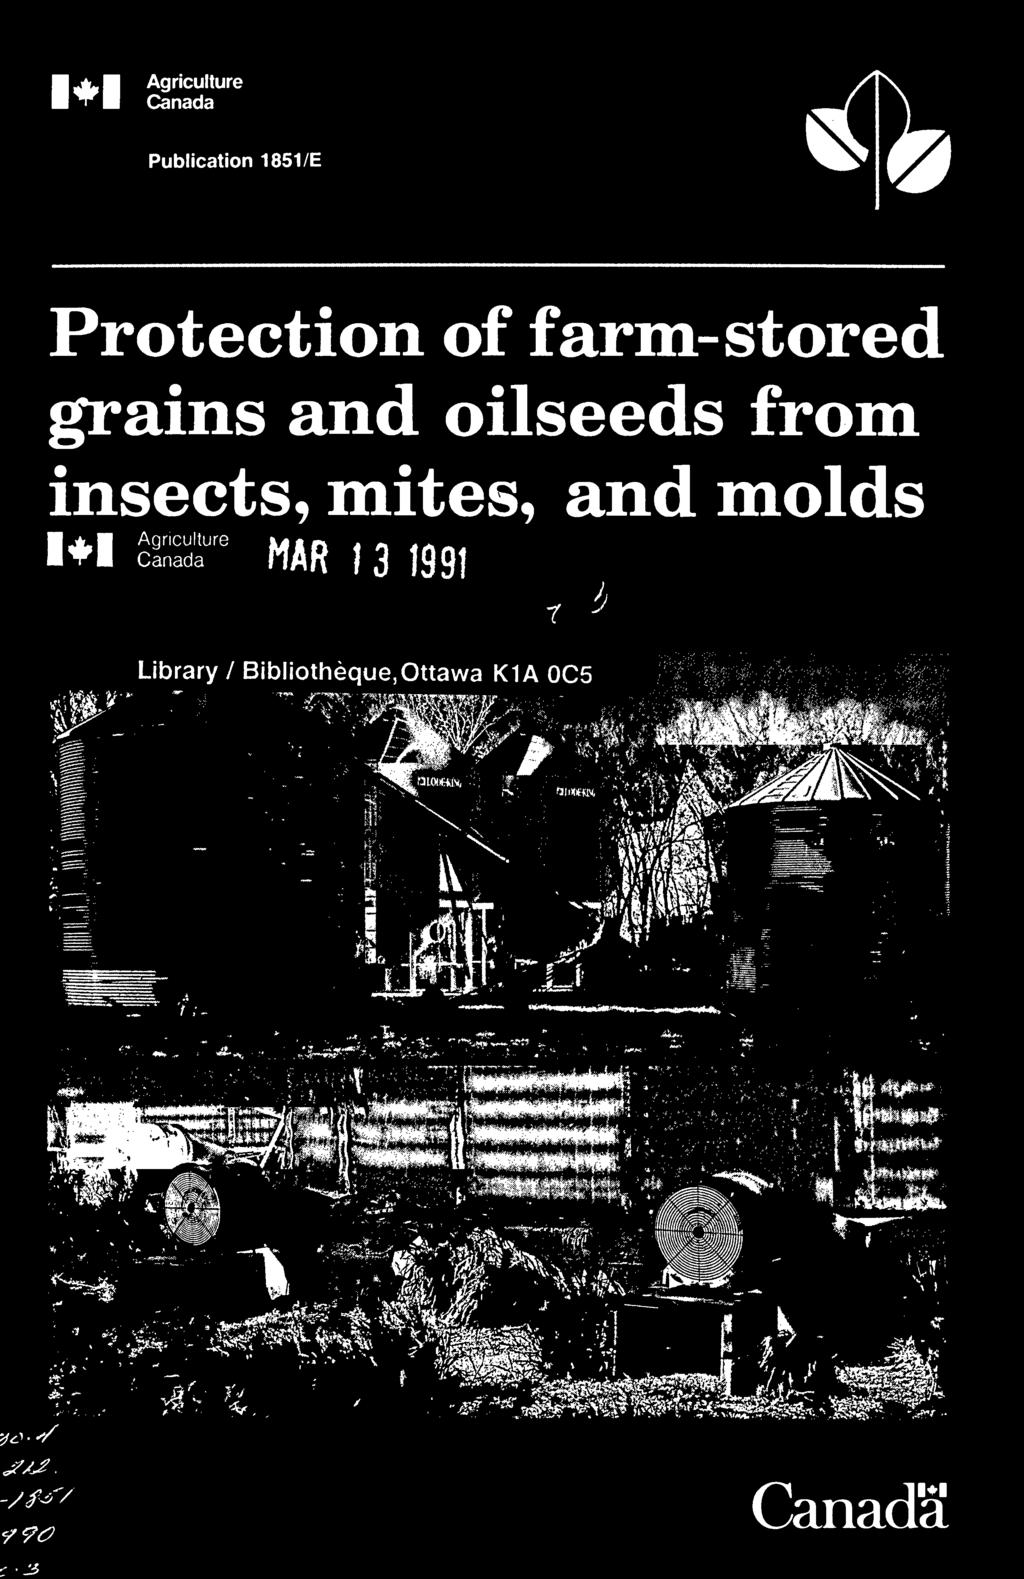 insects, mites, and molds 1+1